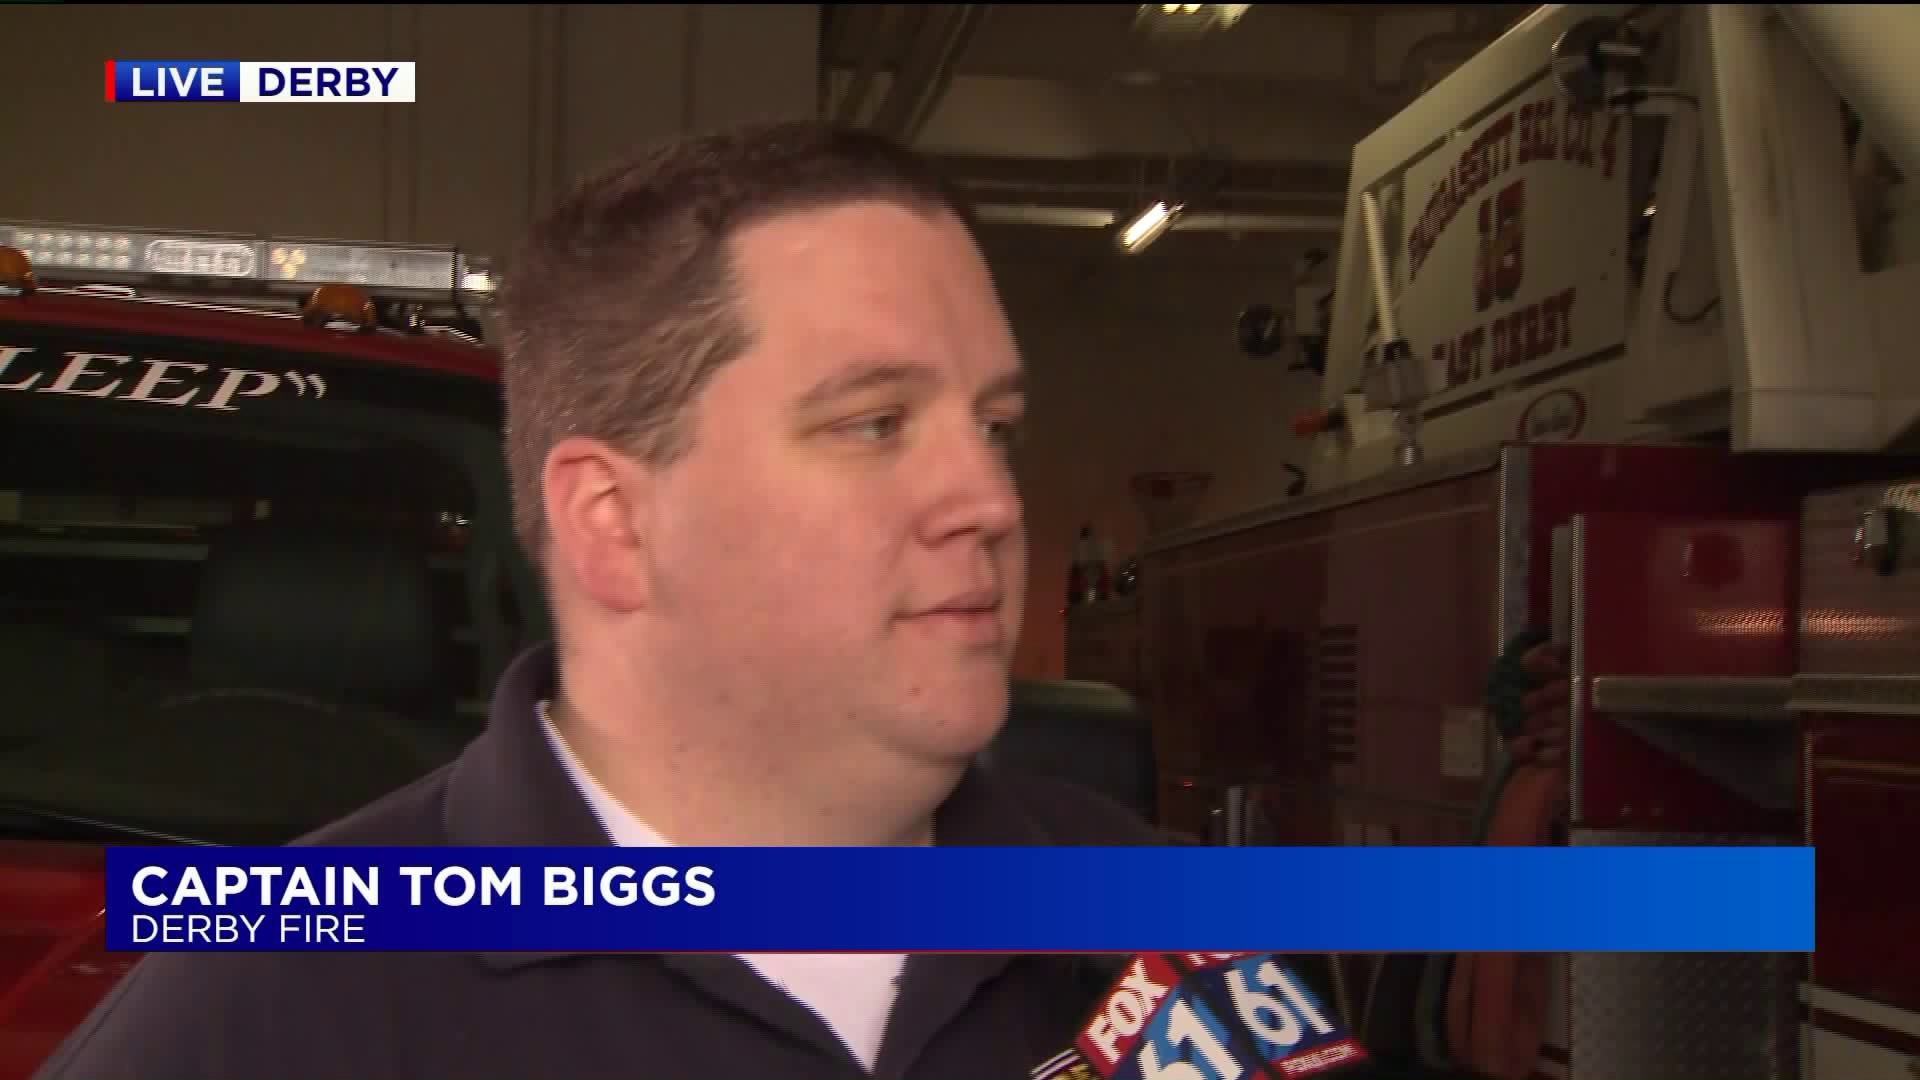 Derby firefighters helping seniors for Thanksgiving